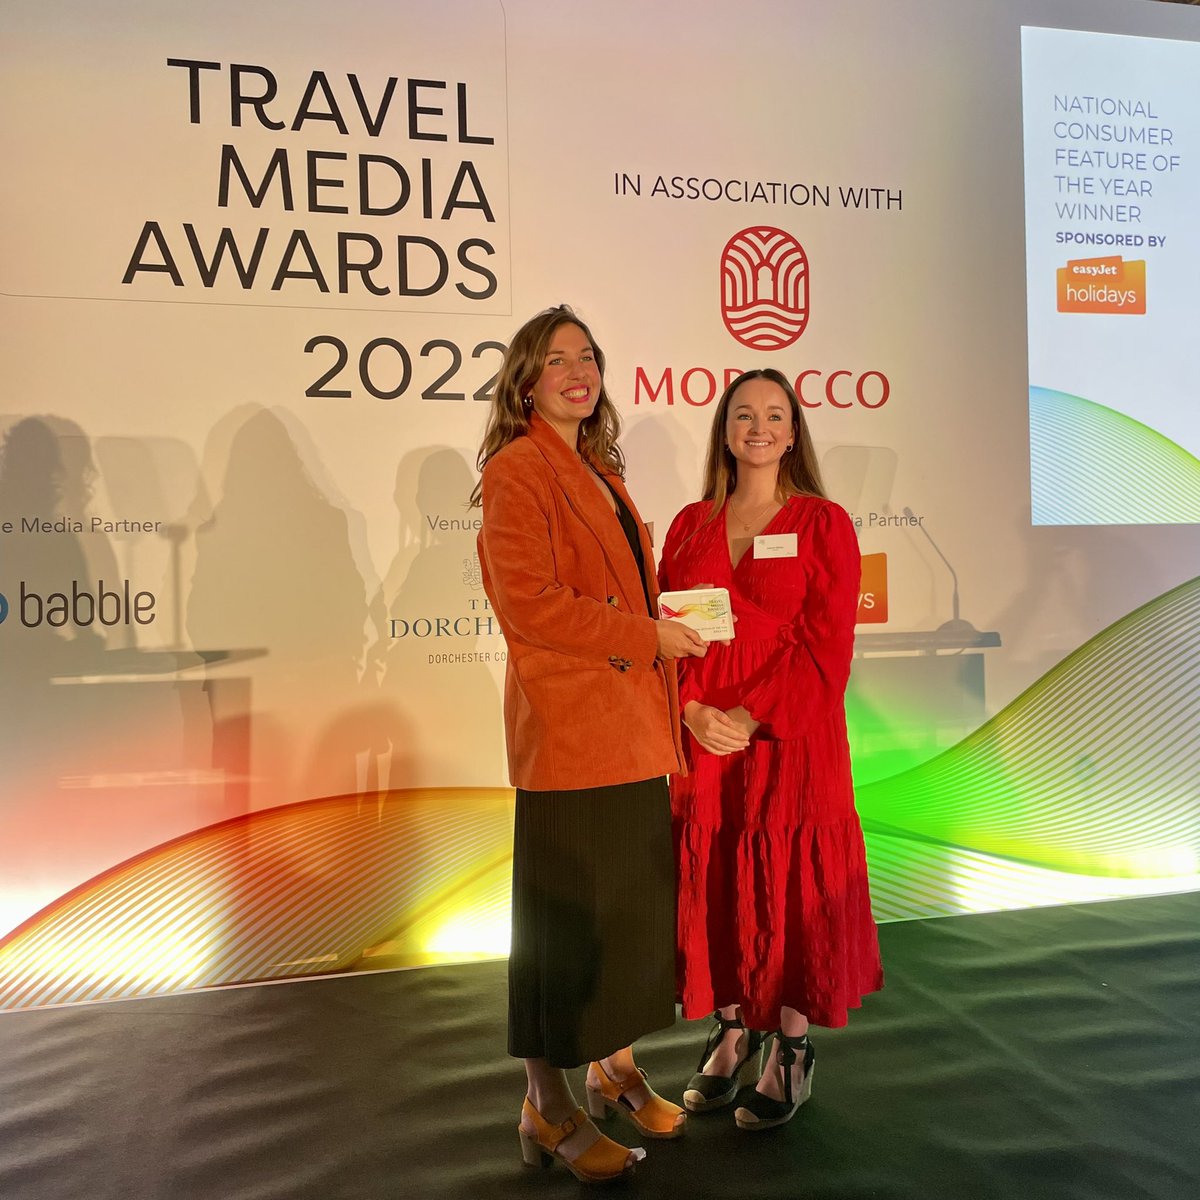 Sian Lewis impressed us all with her ‘Taking the plunge: Ice swimming and sauna rituals in Finland’ feature in the @independent @indytravel – That's why she's our winner of this year’s ‘National Consumer Feature of the Year’, sponsored by easyJet Holidays #TravelMediaAwards2022